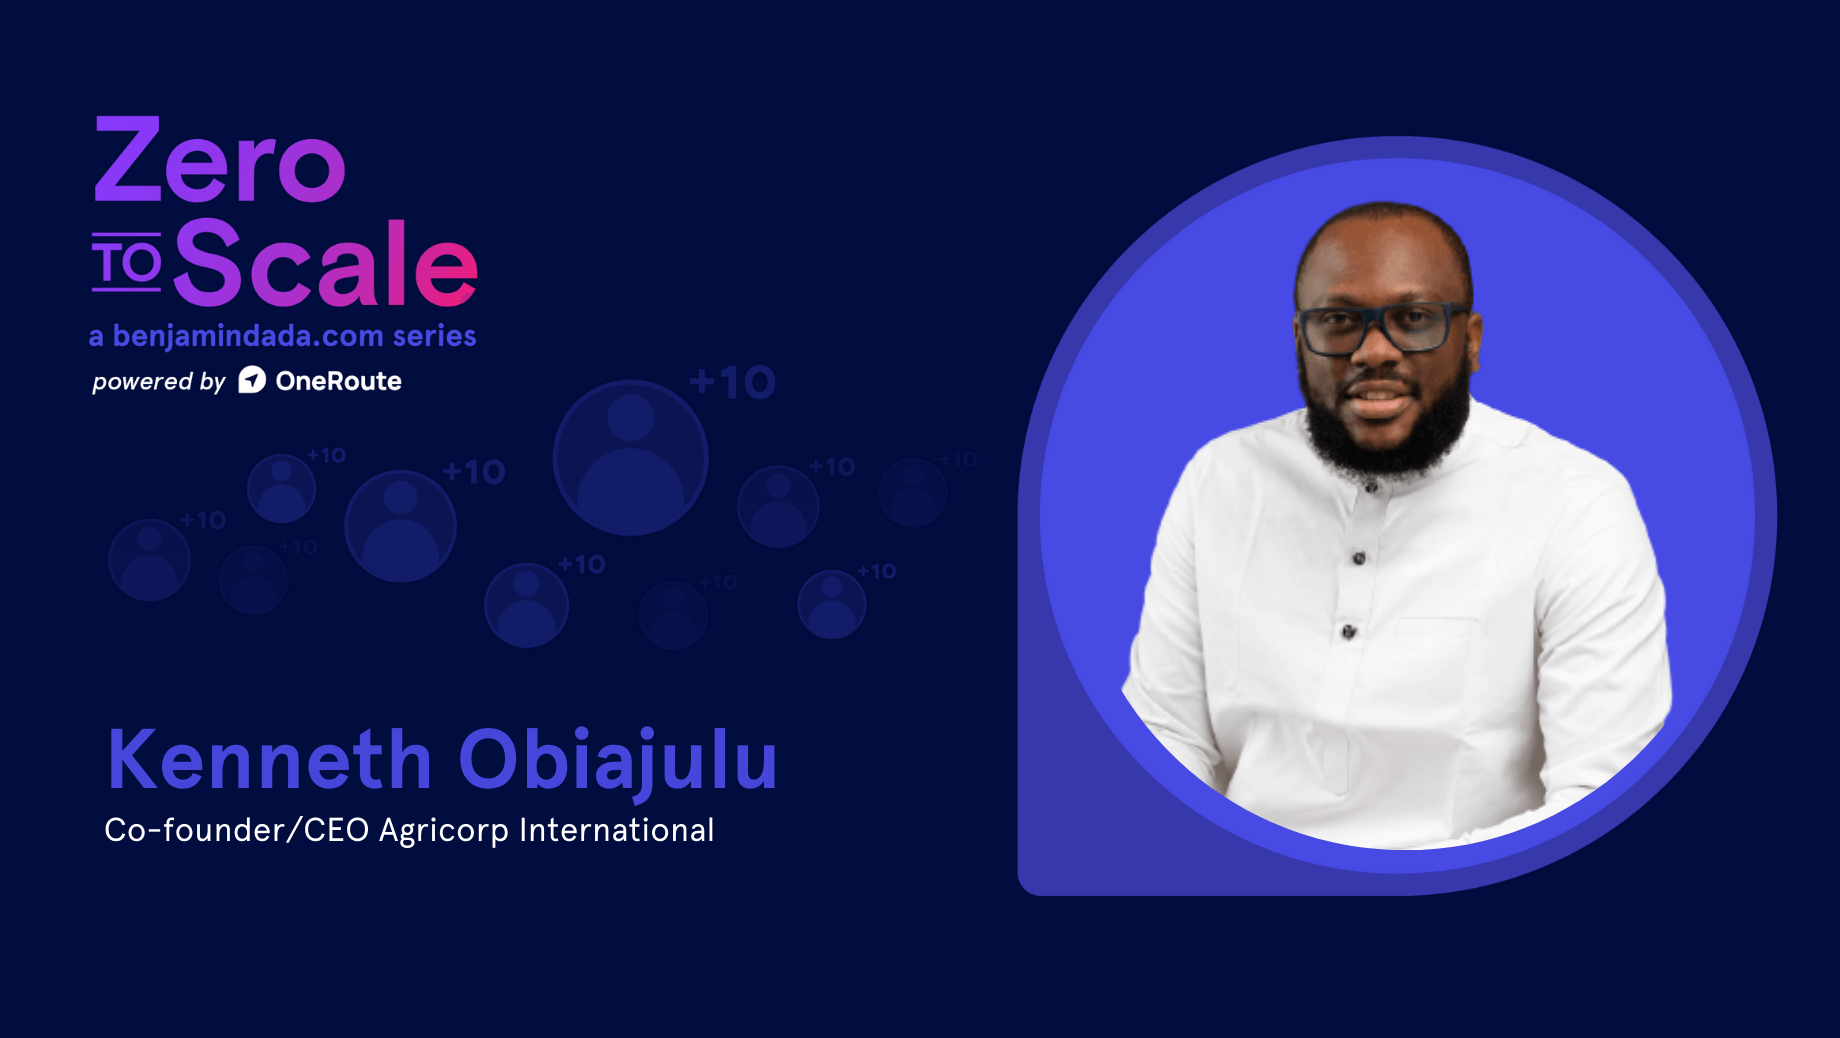 Zero To Scale: Kenneth Obiajulu — Co-founder and CEO of Agricorp International